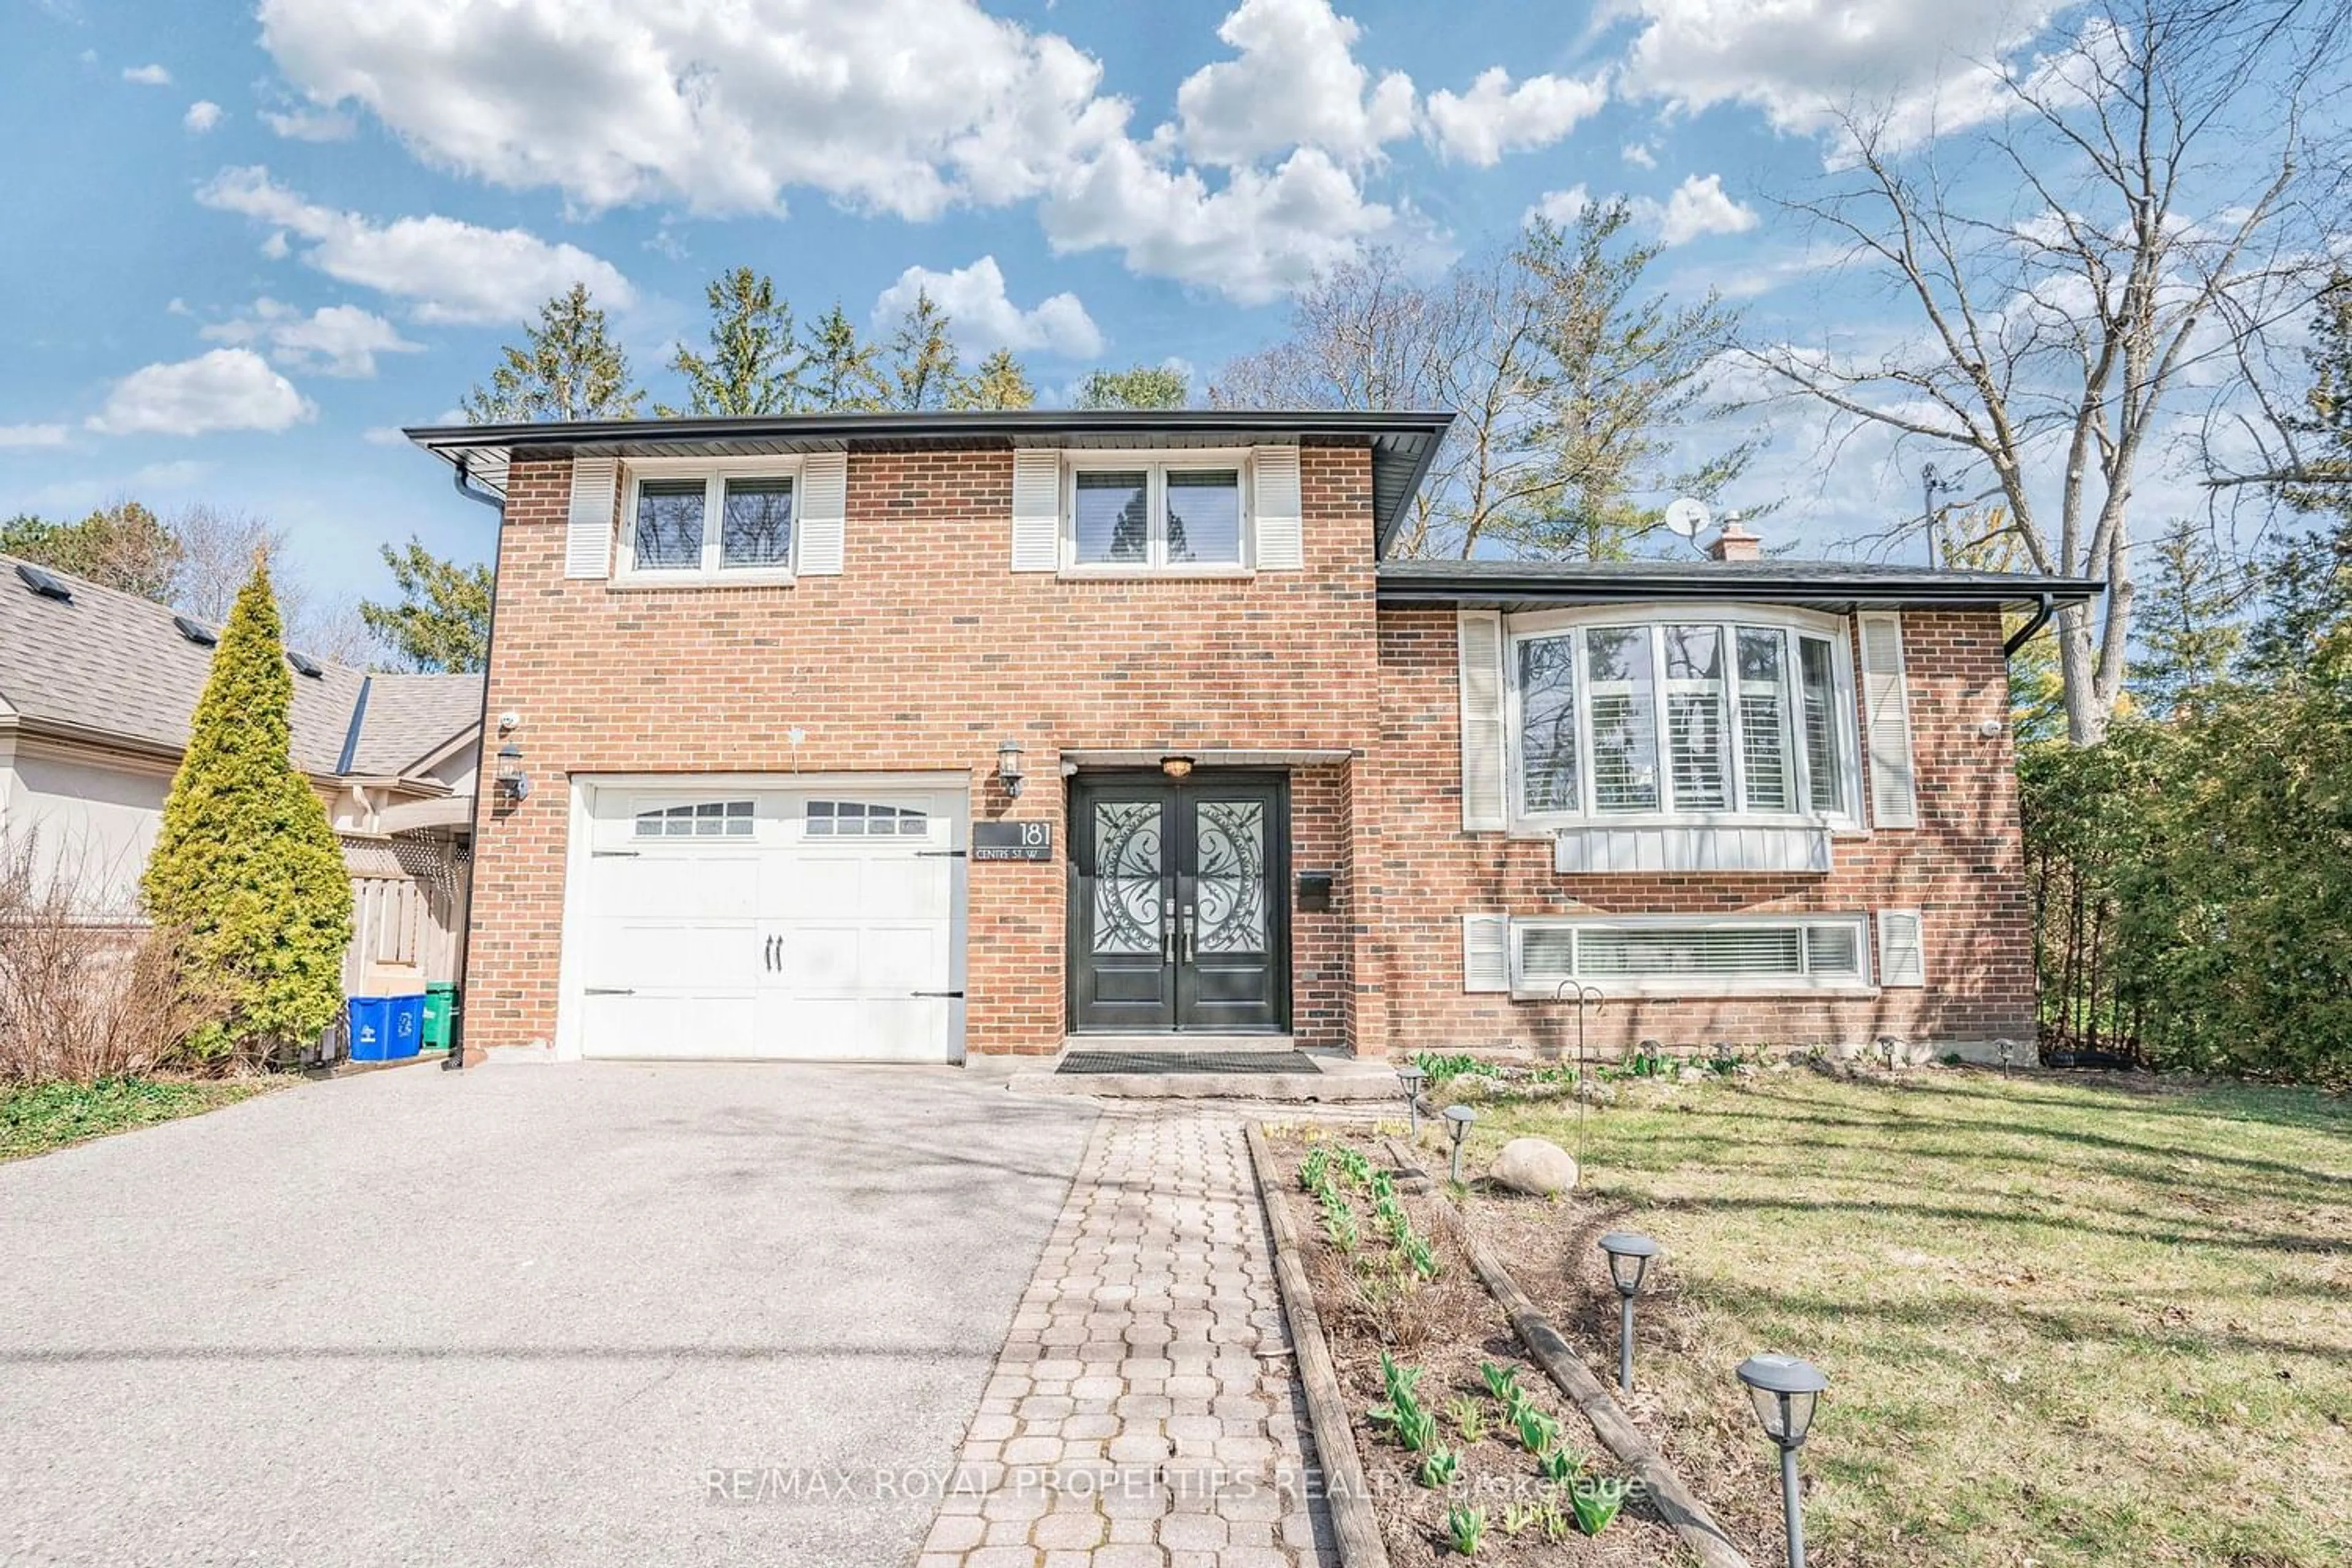 Home with brick exterior material for 181 Centre St, Richmond Hill Ontario L4C 3P9